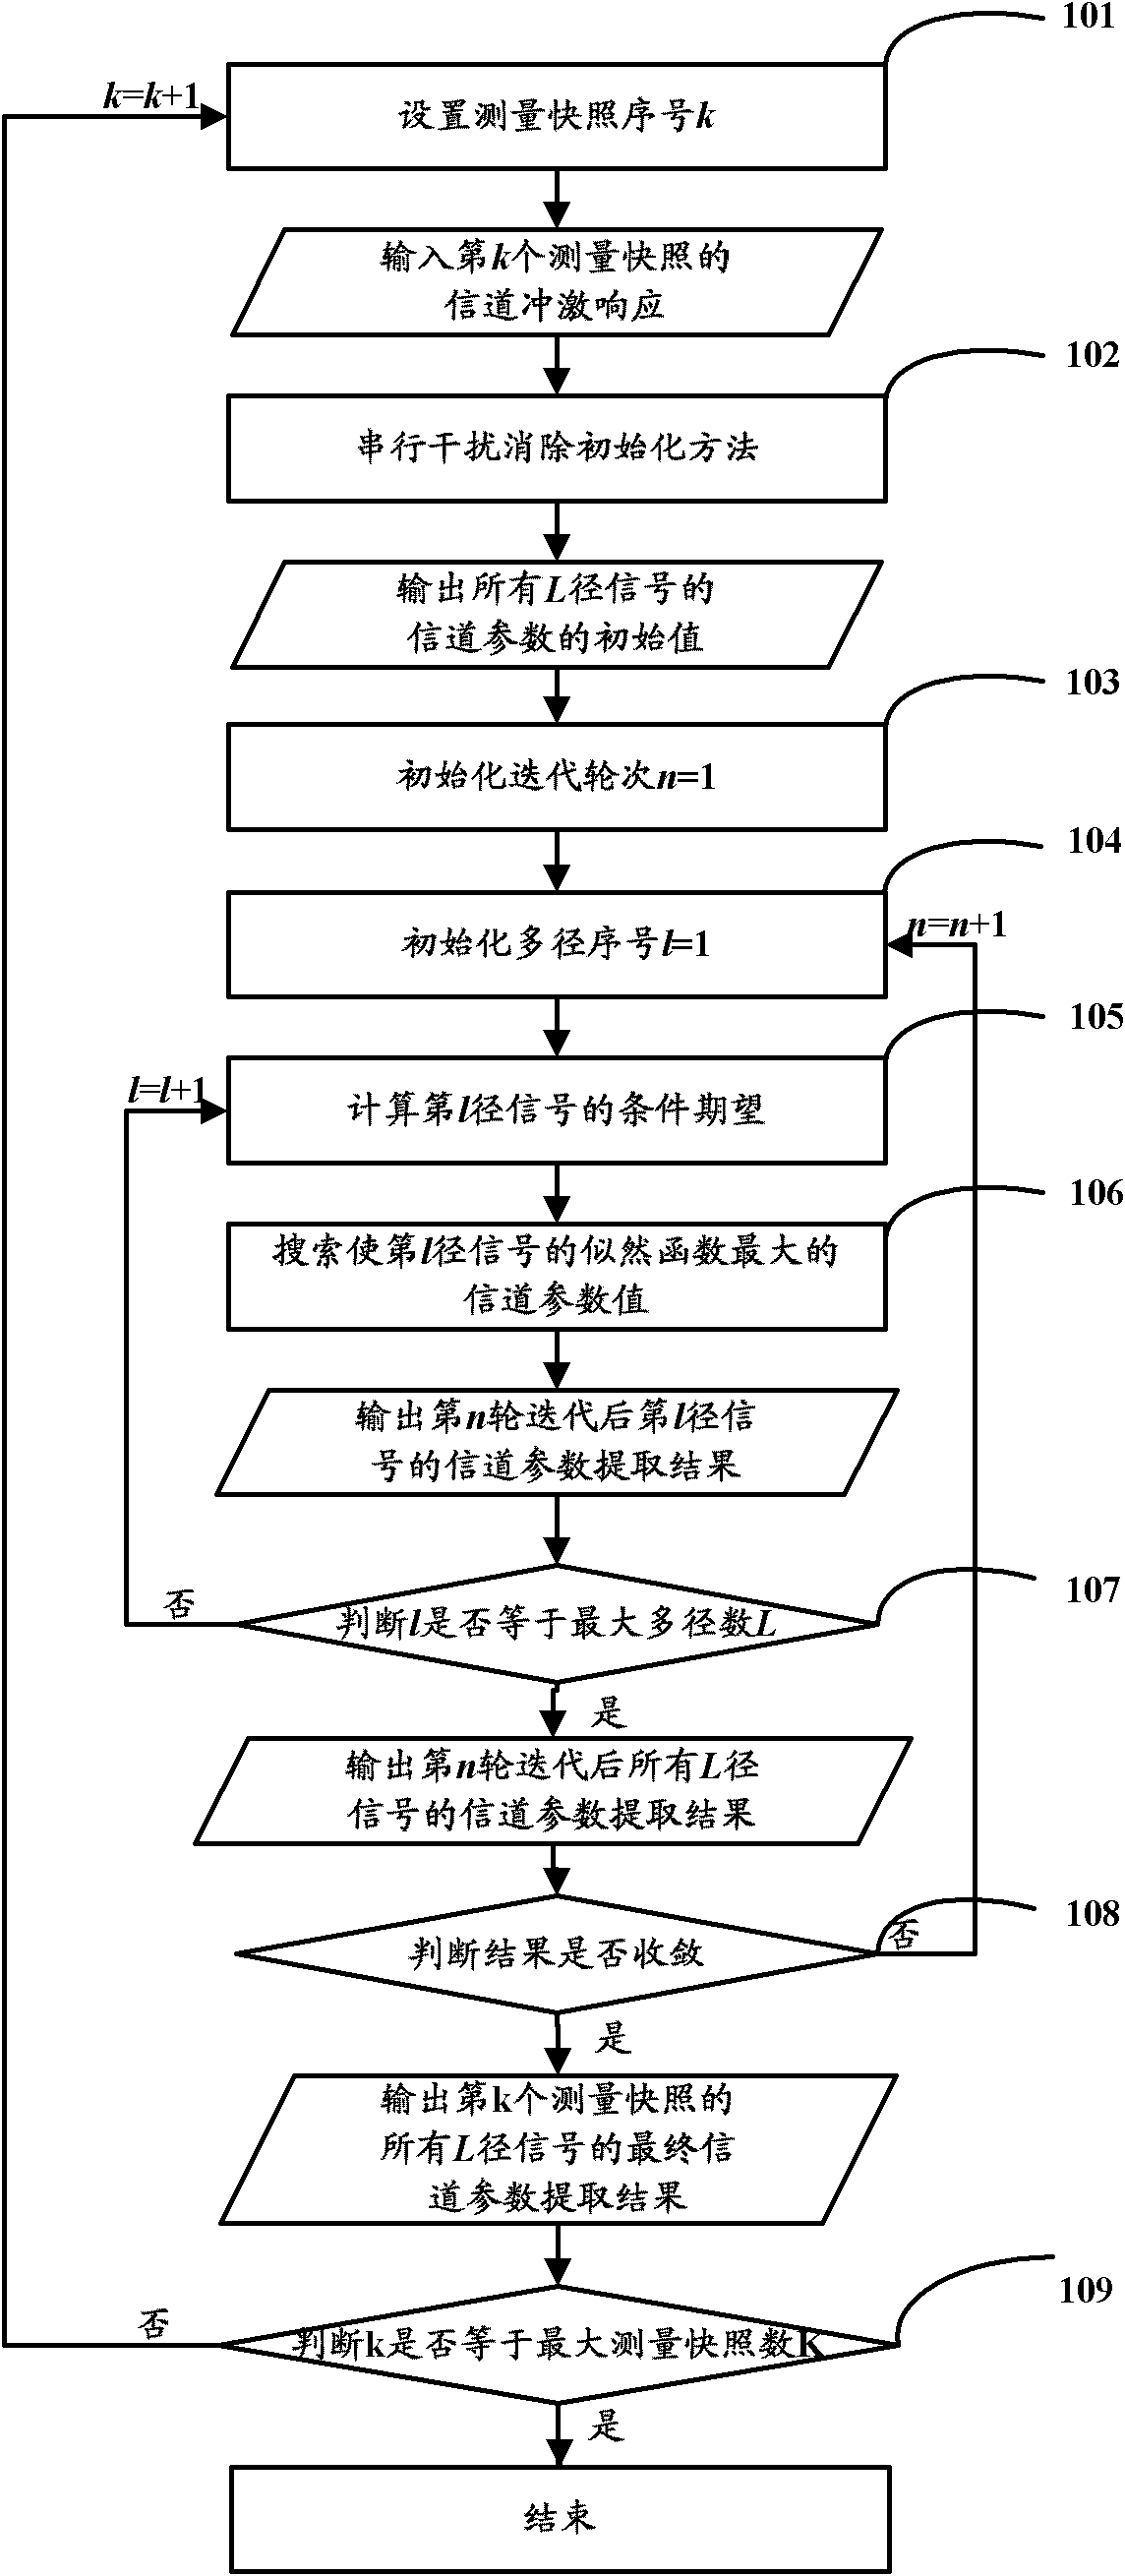 Multidimensional channel parameter extracting method